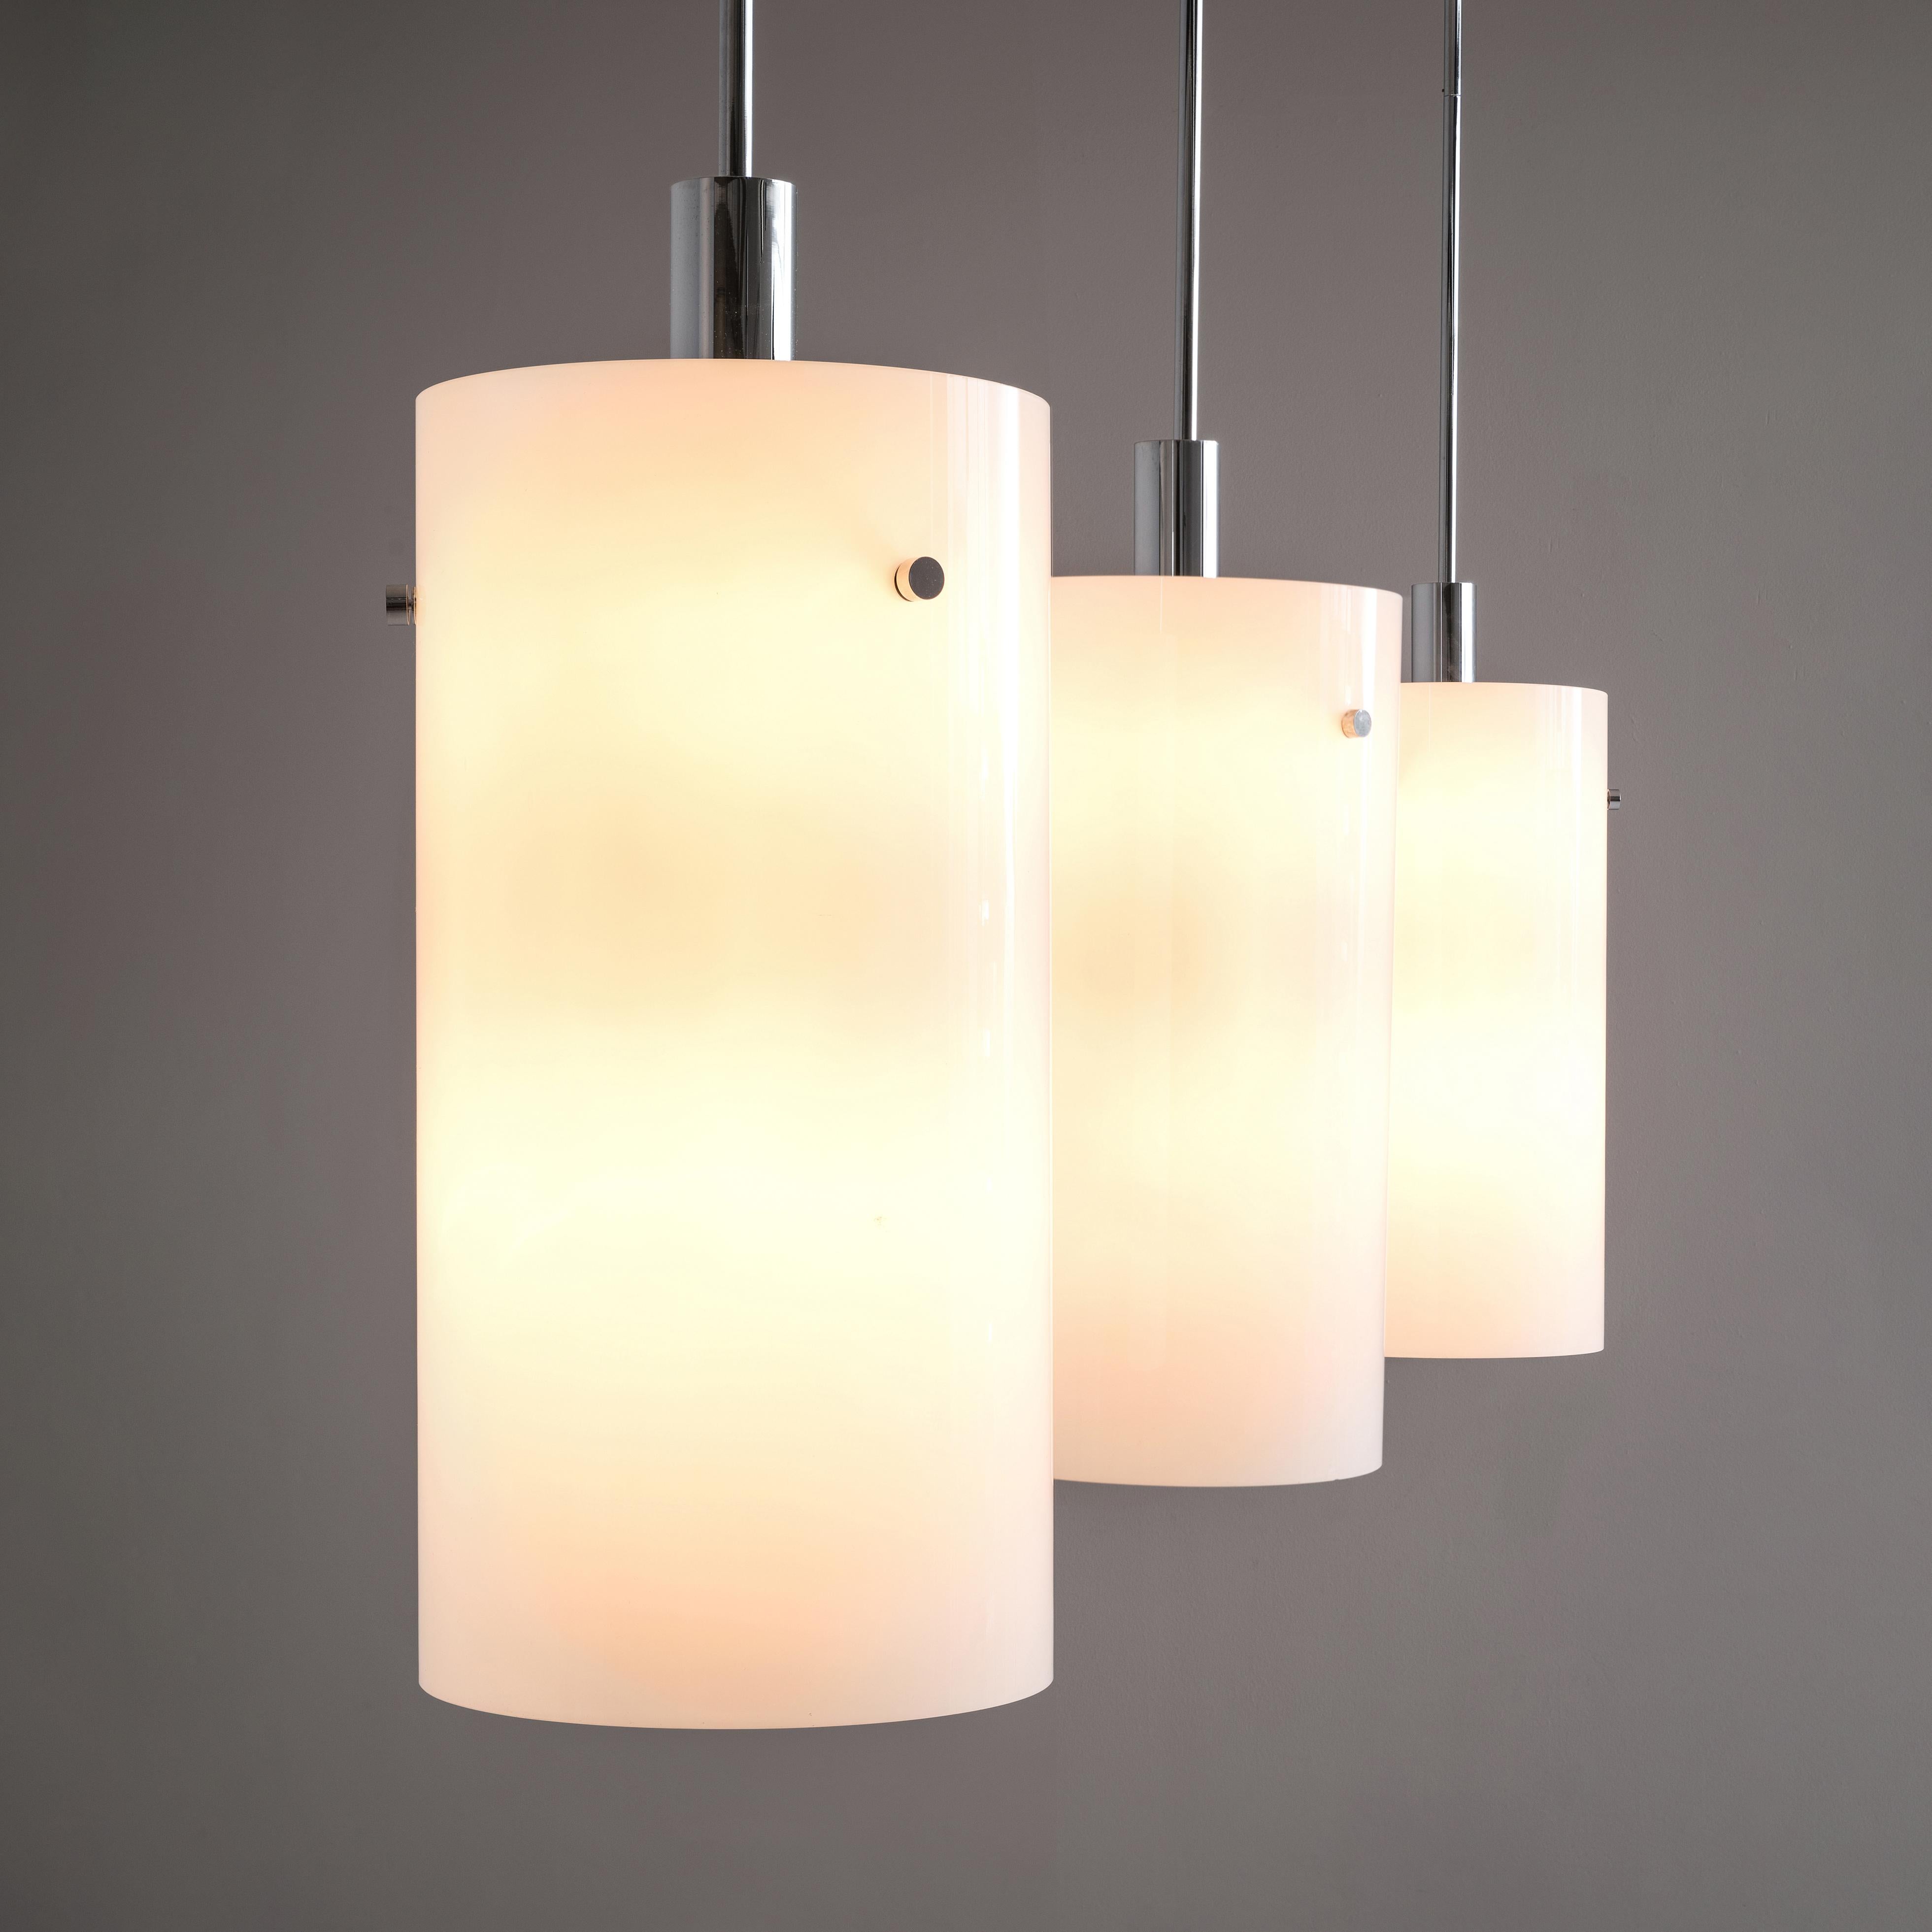 Pendants, metal, glass, Europe, 1970s

This large set of atmospheric pendants are cylindrically shaped and executed in white glass, which results in a nice soft light-tone creating a lively ambience in the room. The fixture is based on a minimalist